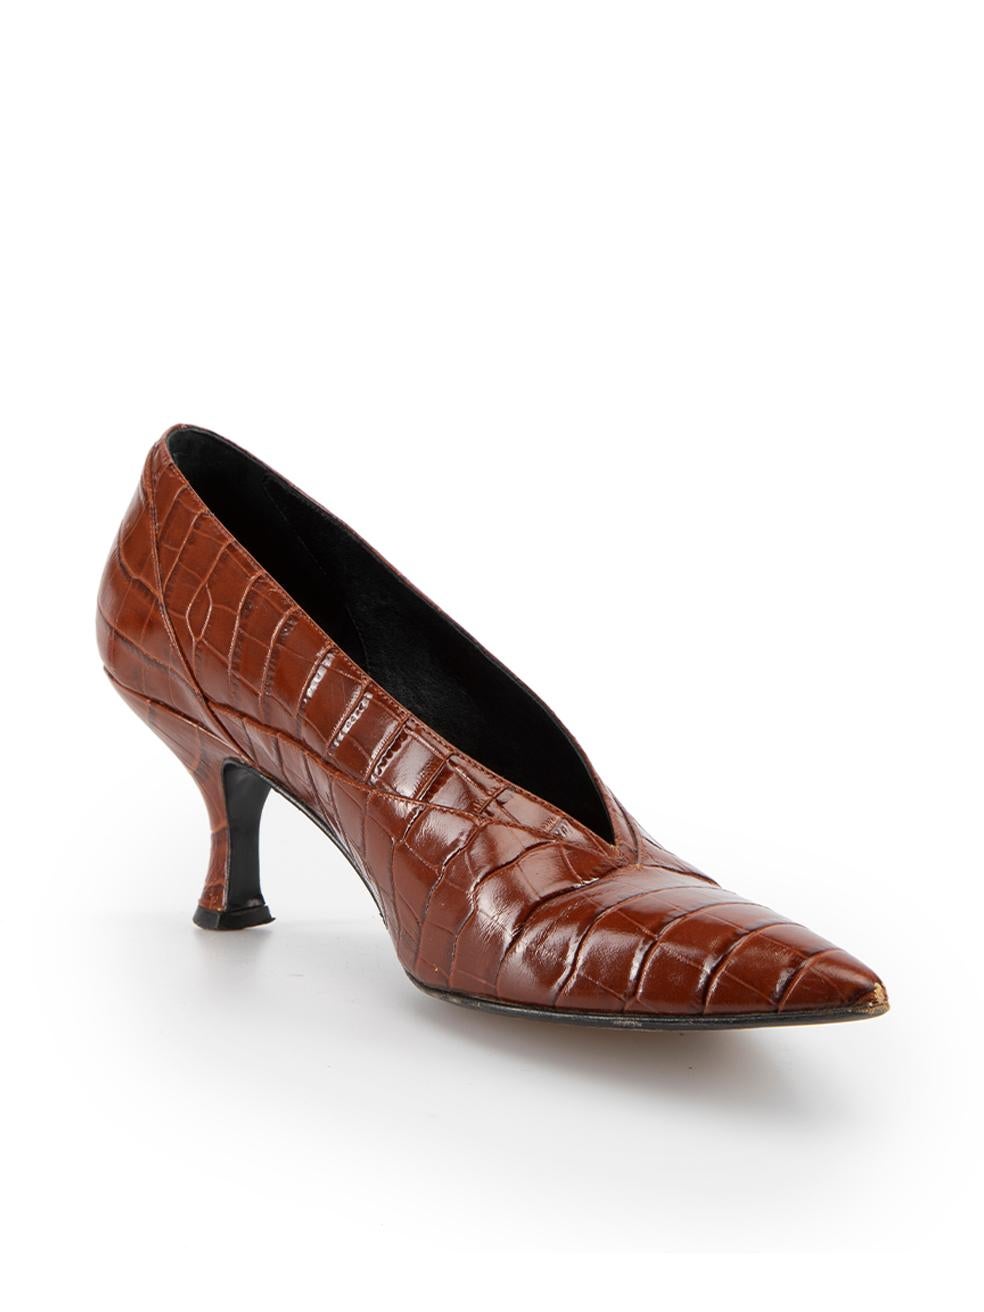 CONDITION is Very good. Minimal wear to shoes is evident. Minimal wear to both toes and the left-shoe heel with light scuffing on this used Erdem designer resale item. 



Details


Brown

Leather

Slip on heels

Croc embossed pattern

Pointed